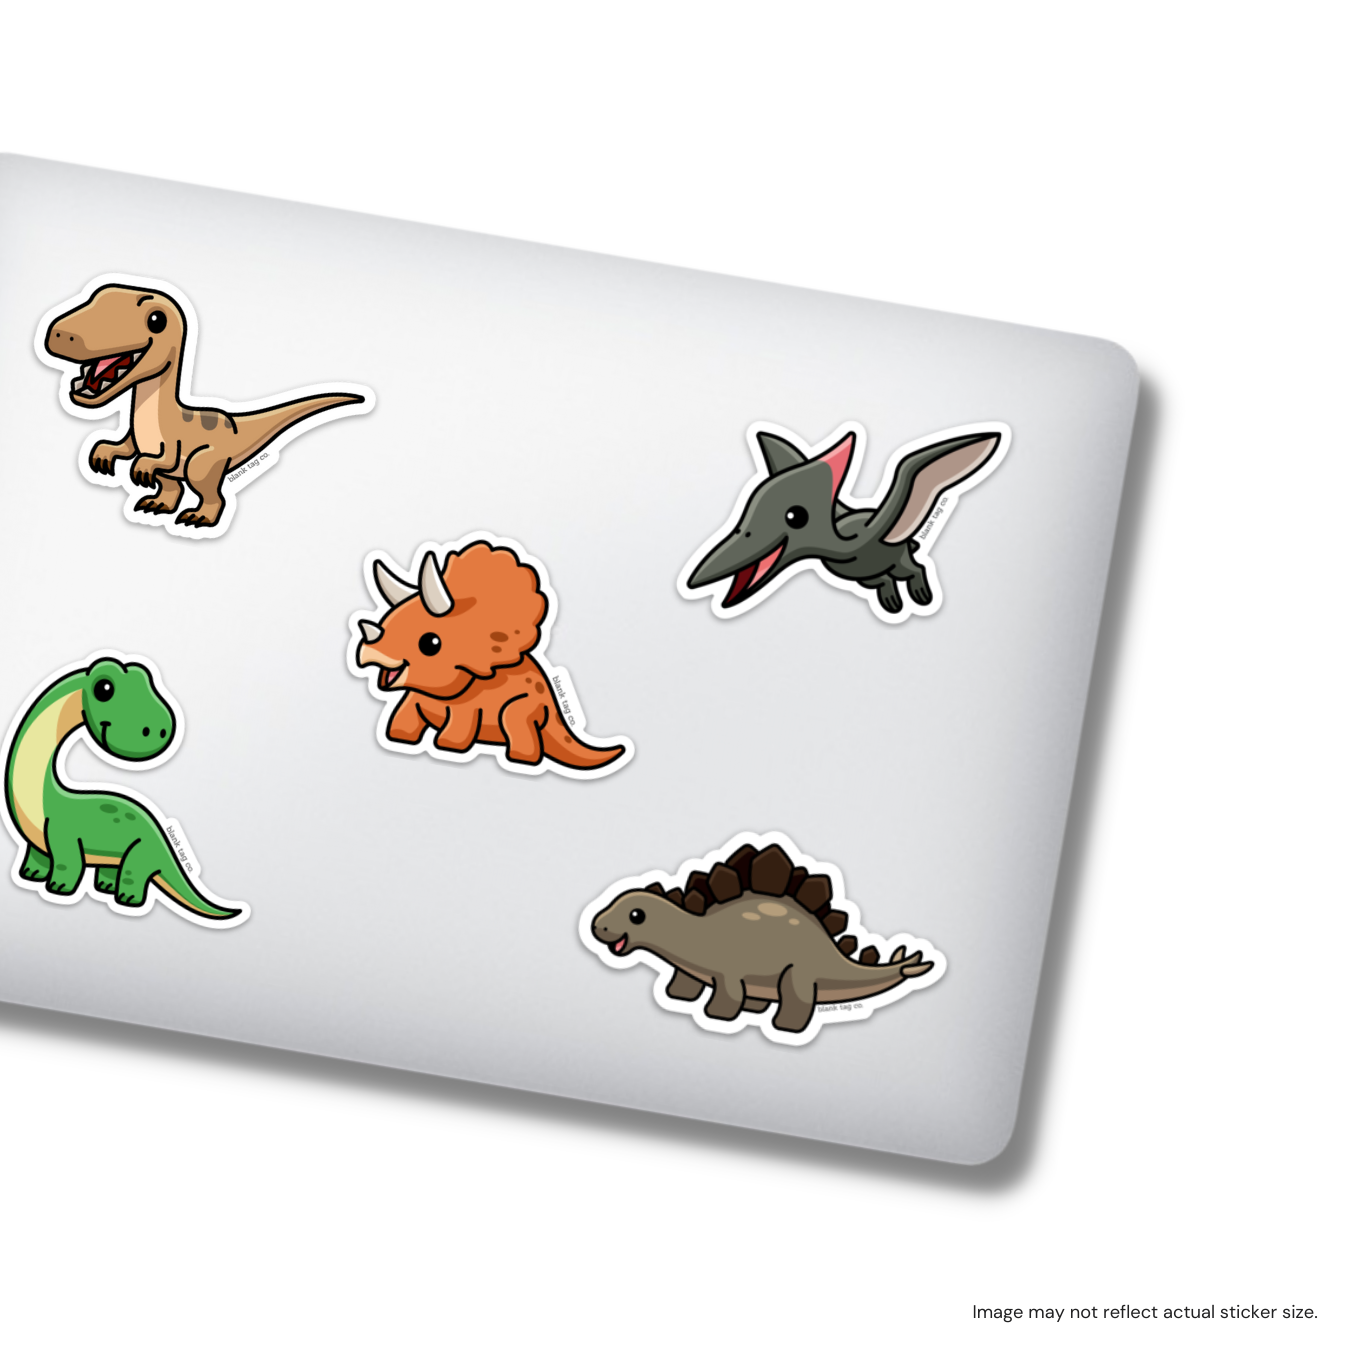 The Triceratops Sticker